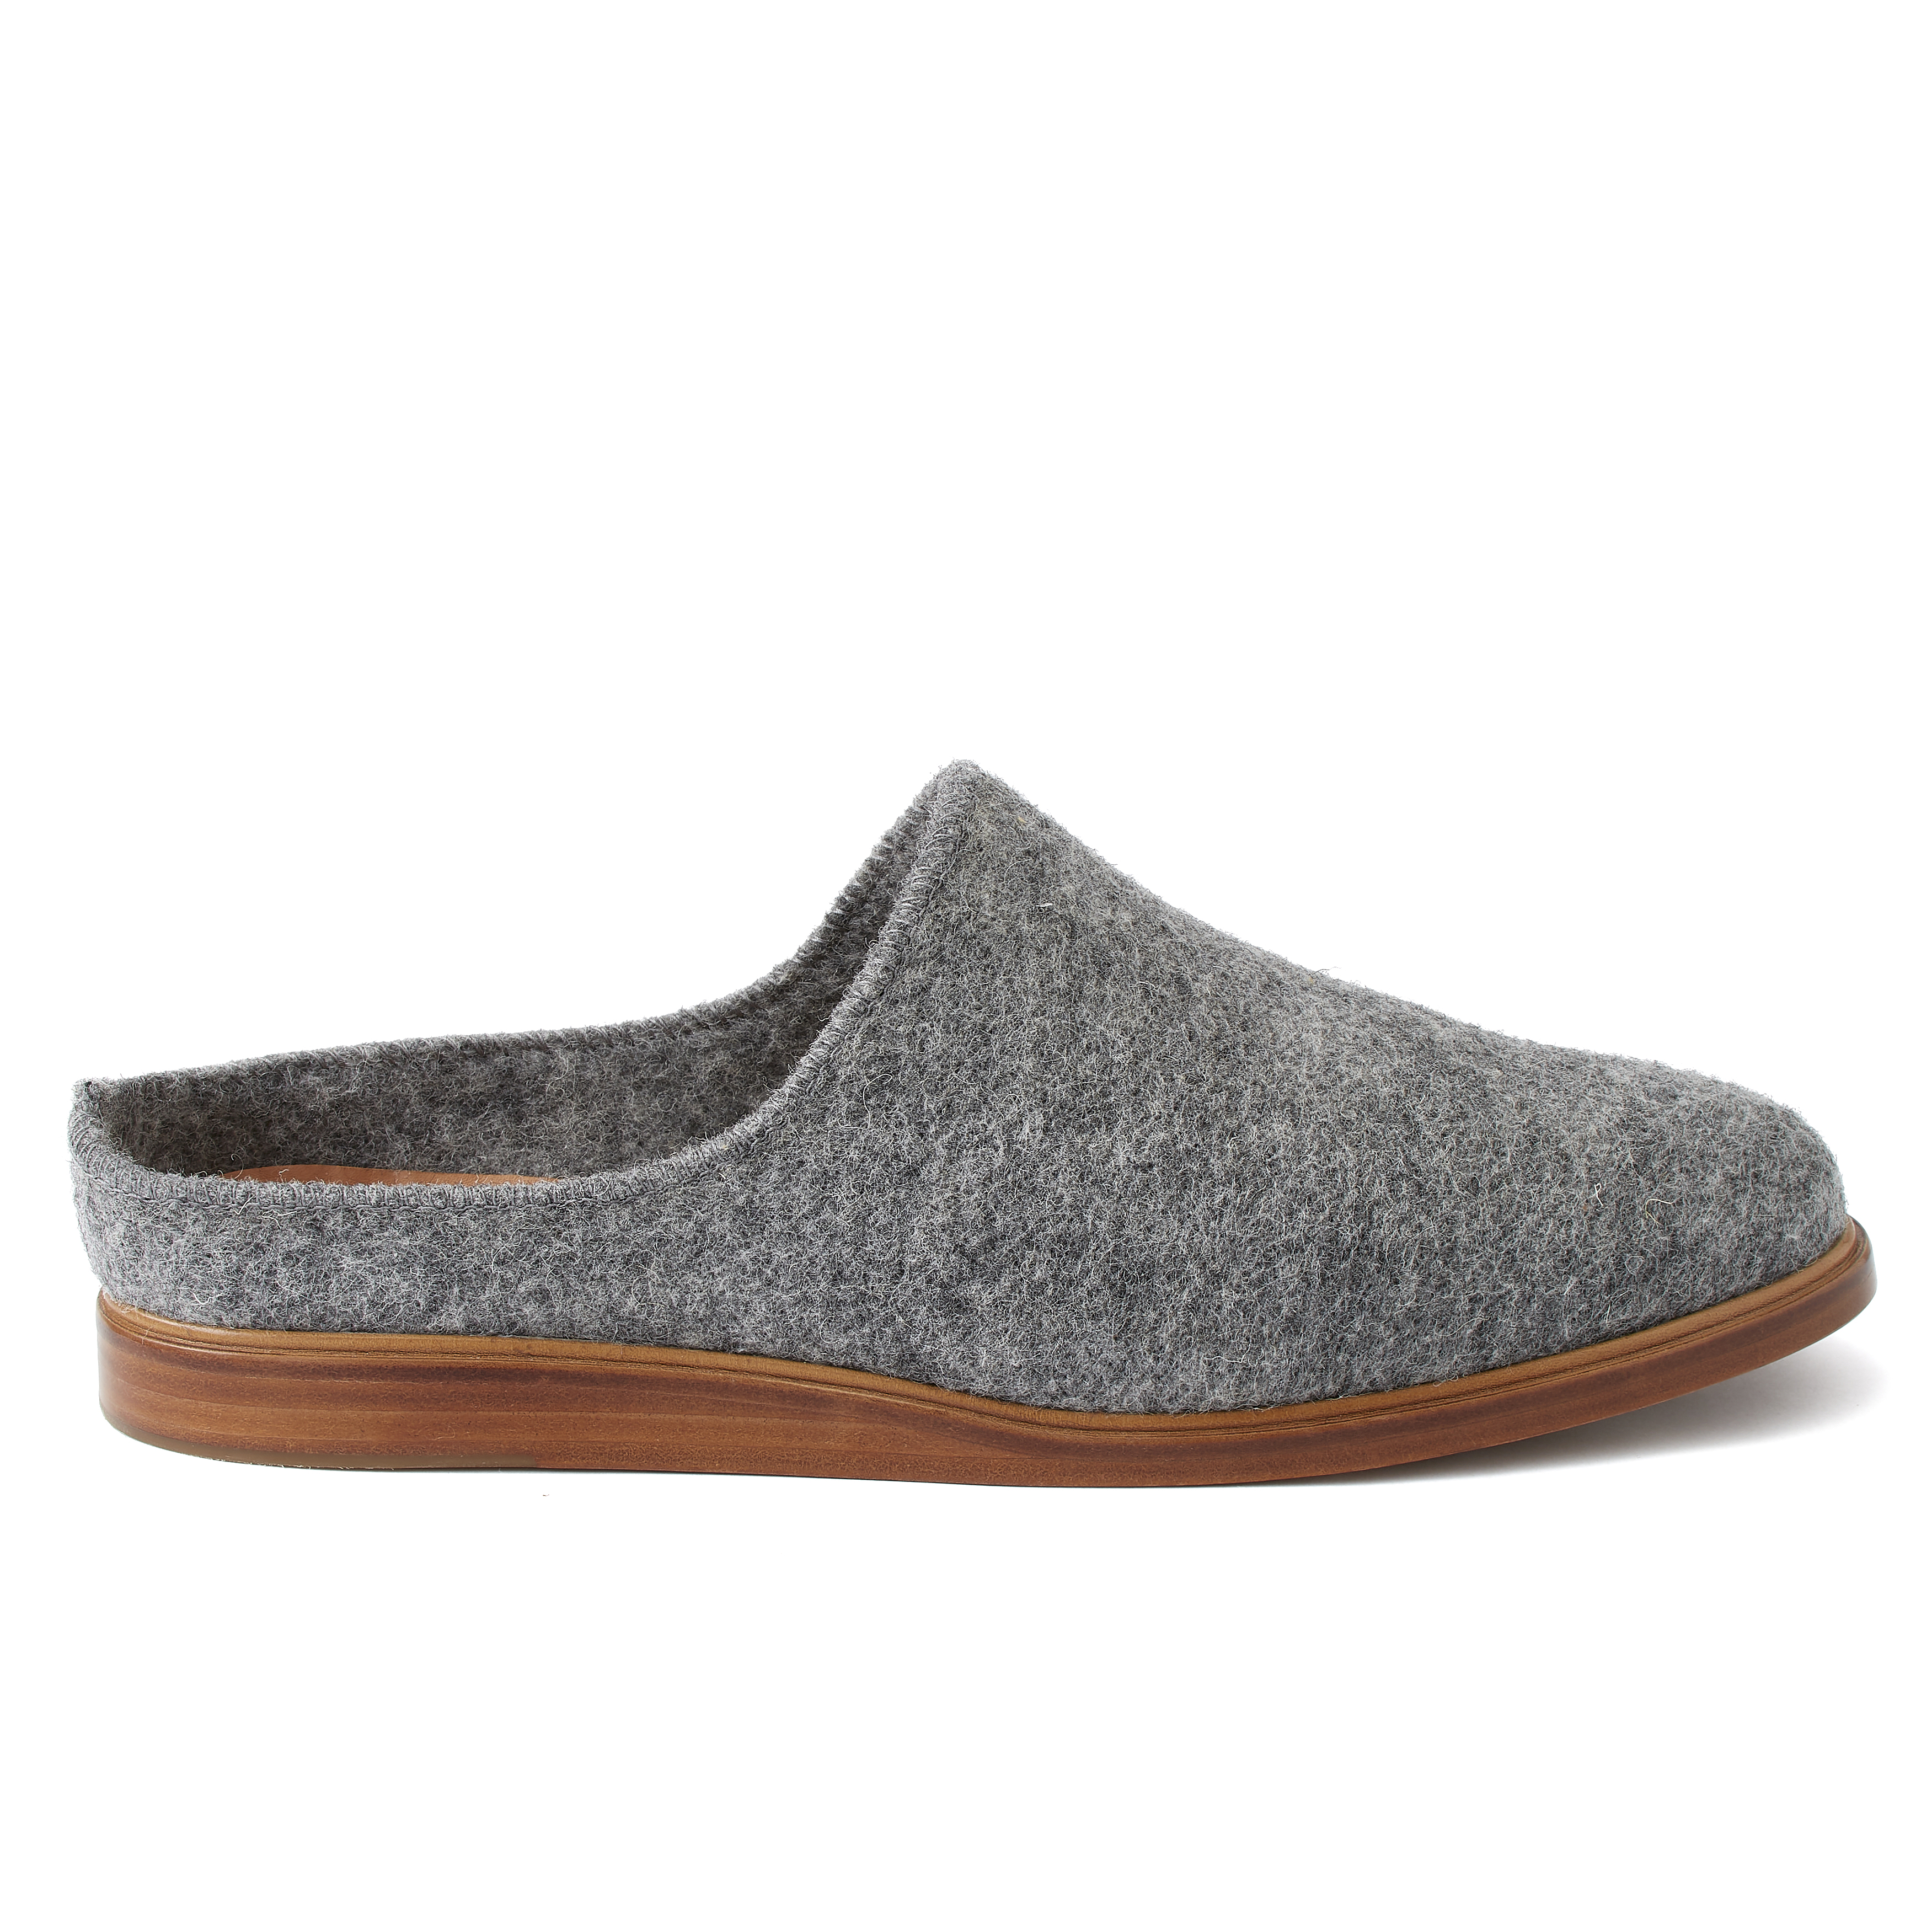 shoes with wool